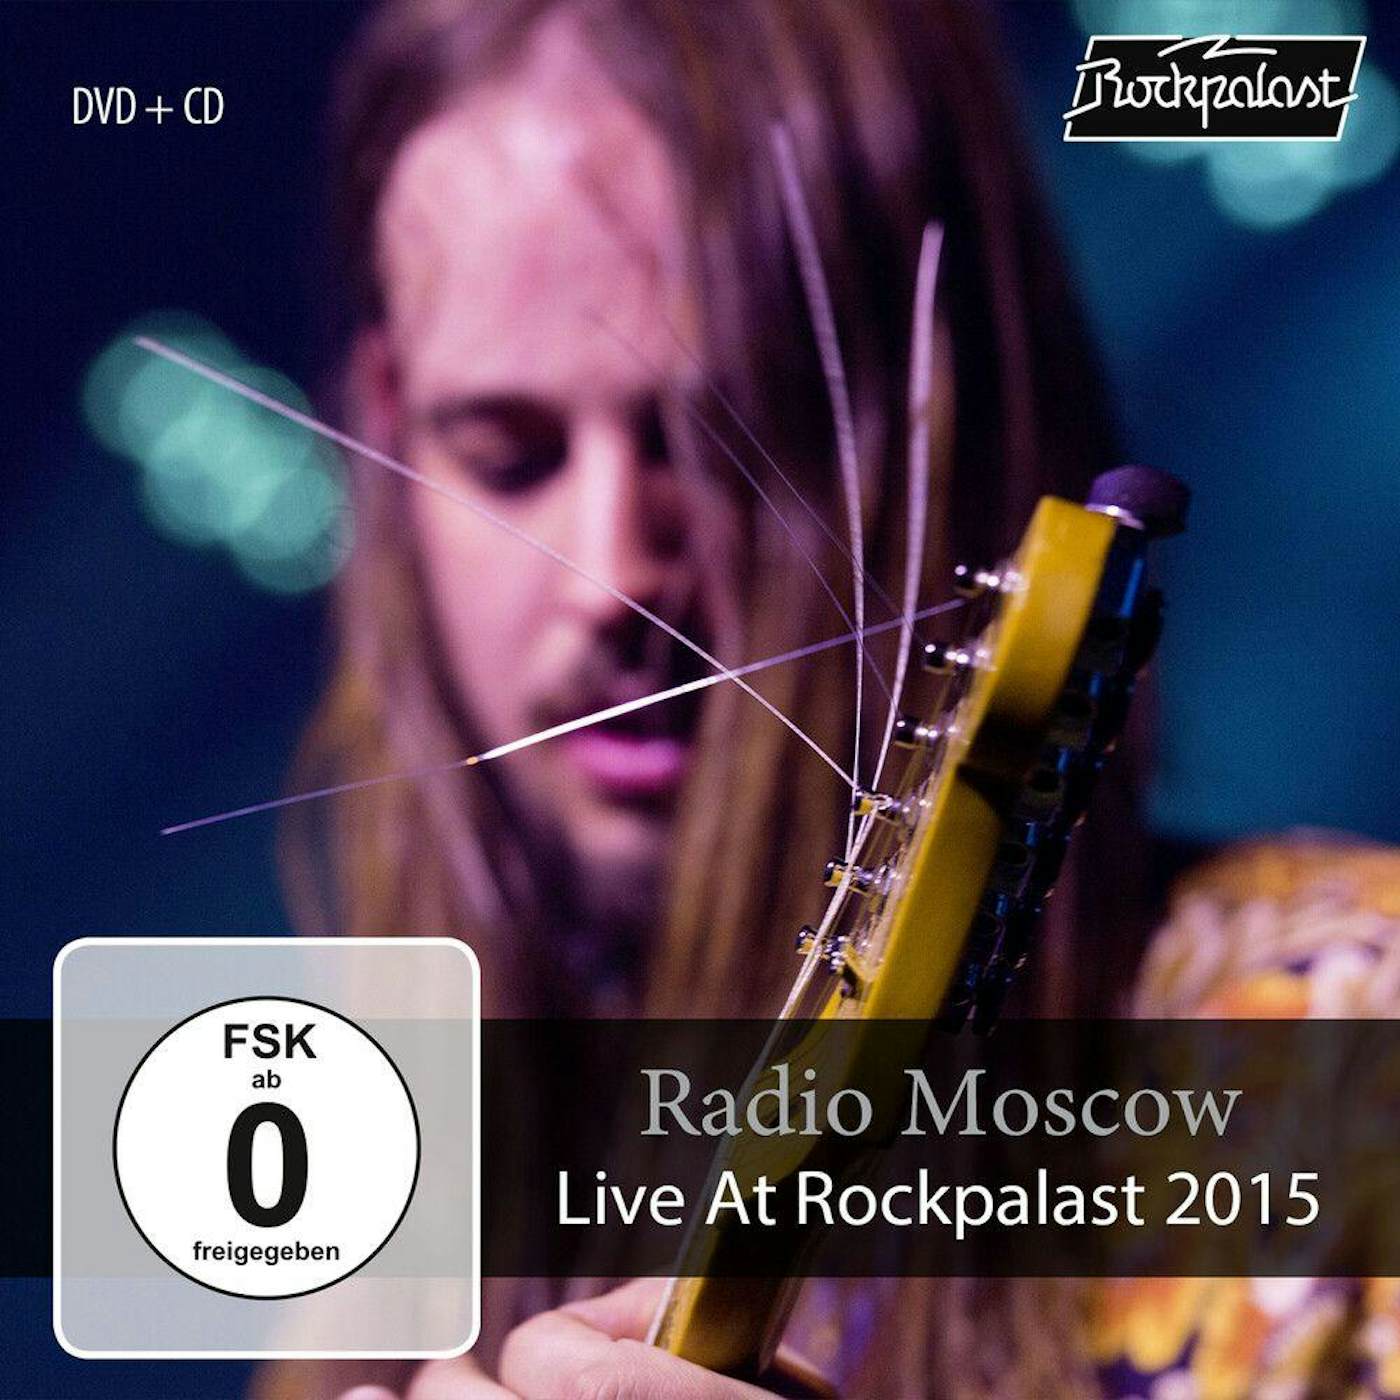 Radio Moscow LIVE AT ROCKPALAST 2015 CD